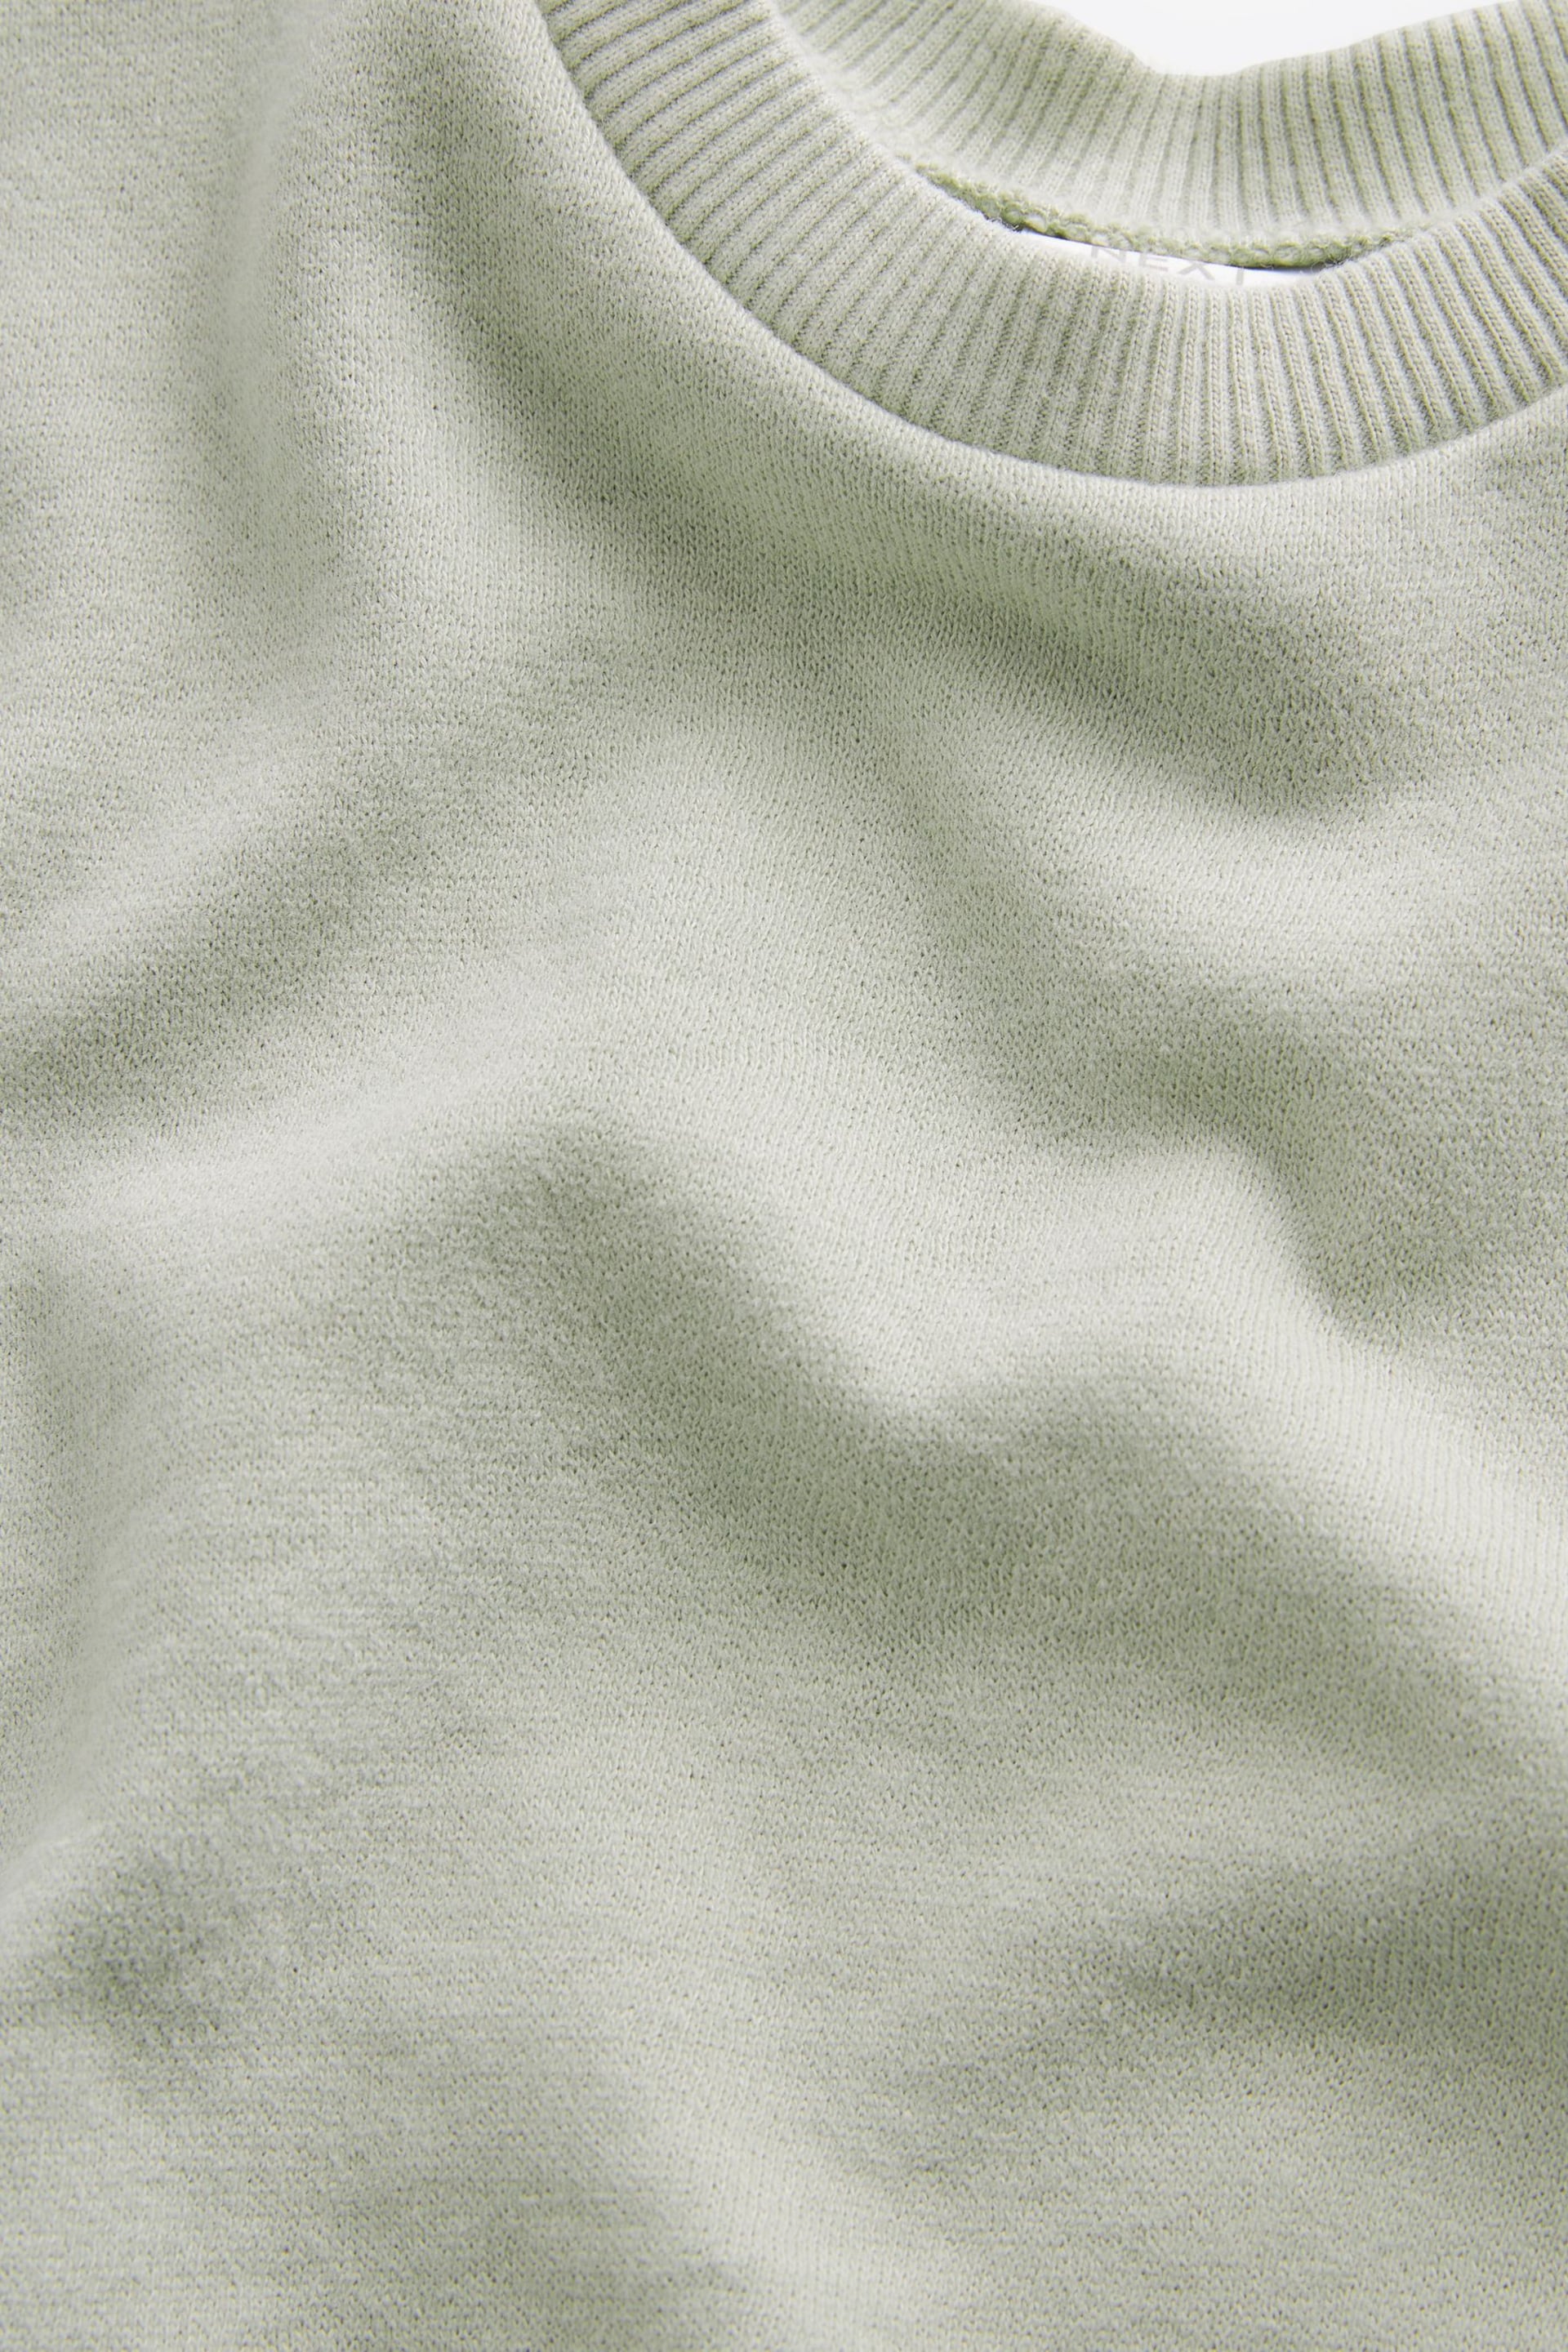 Mint Green Cosy Sweat Jersey Bubble Bum Baby Romper - Image 3 of 6